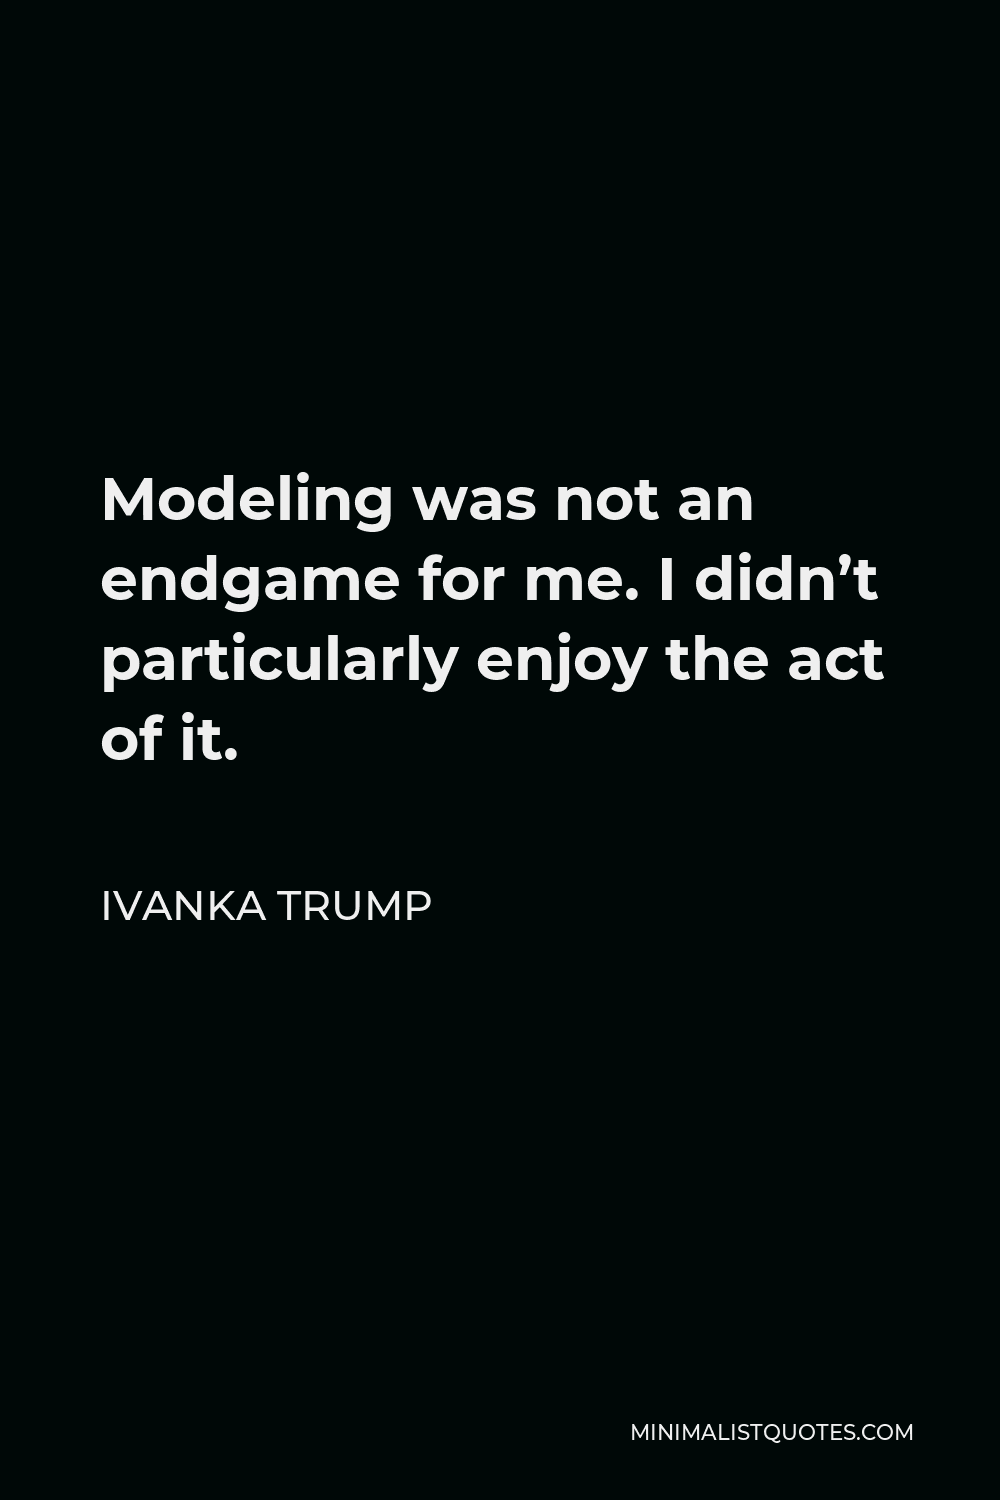 Ivanka Trump Quote - Modeling was not an endgame for me. I didn’t particularly enjoy the act of it.